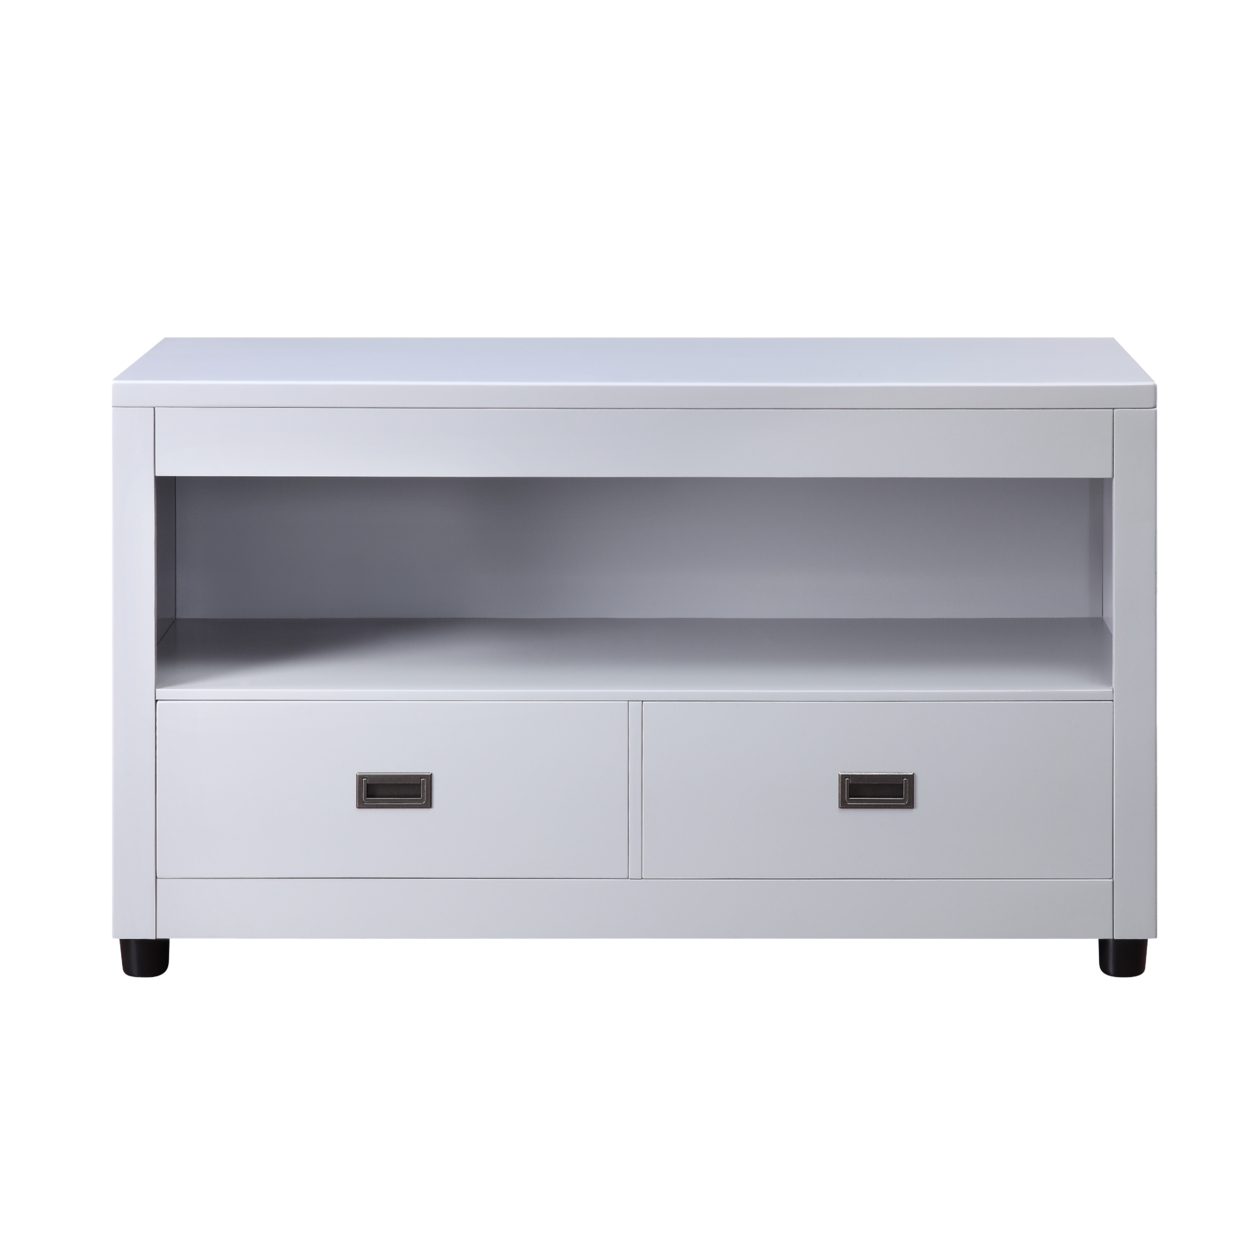 Wooden Console Cabinet With 2 Drawers And Open Shelf, Gray And Black- Saltoro Sherpi